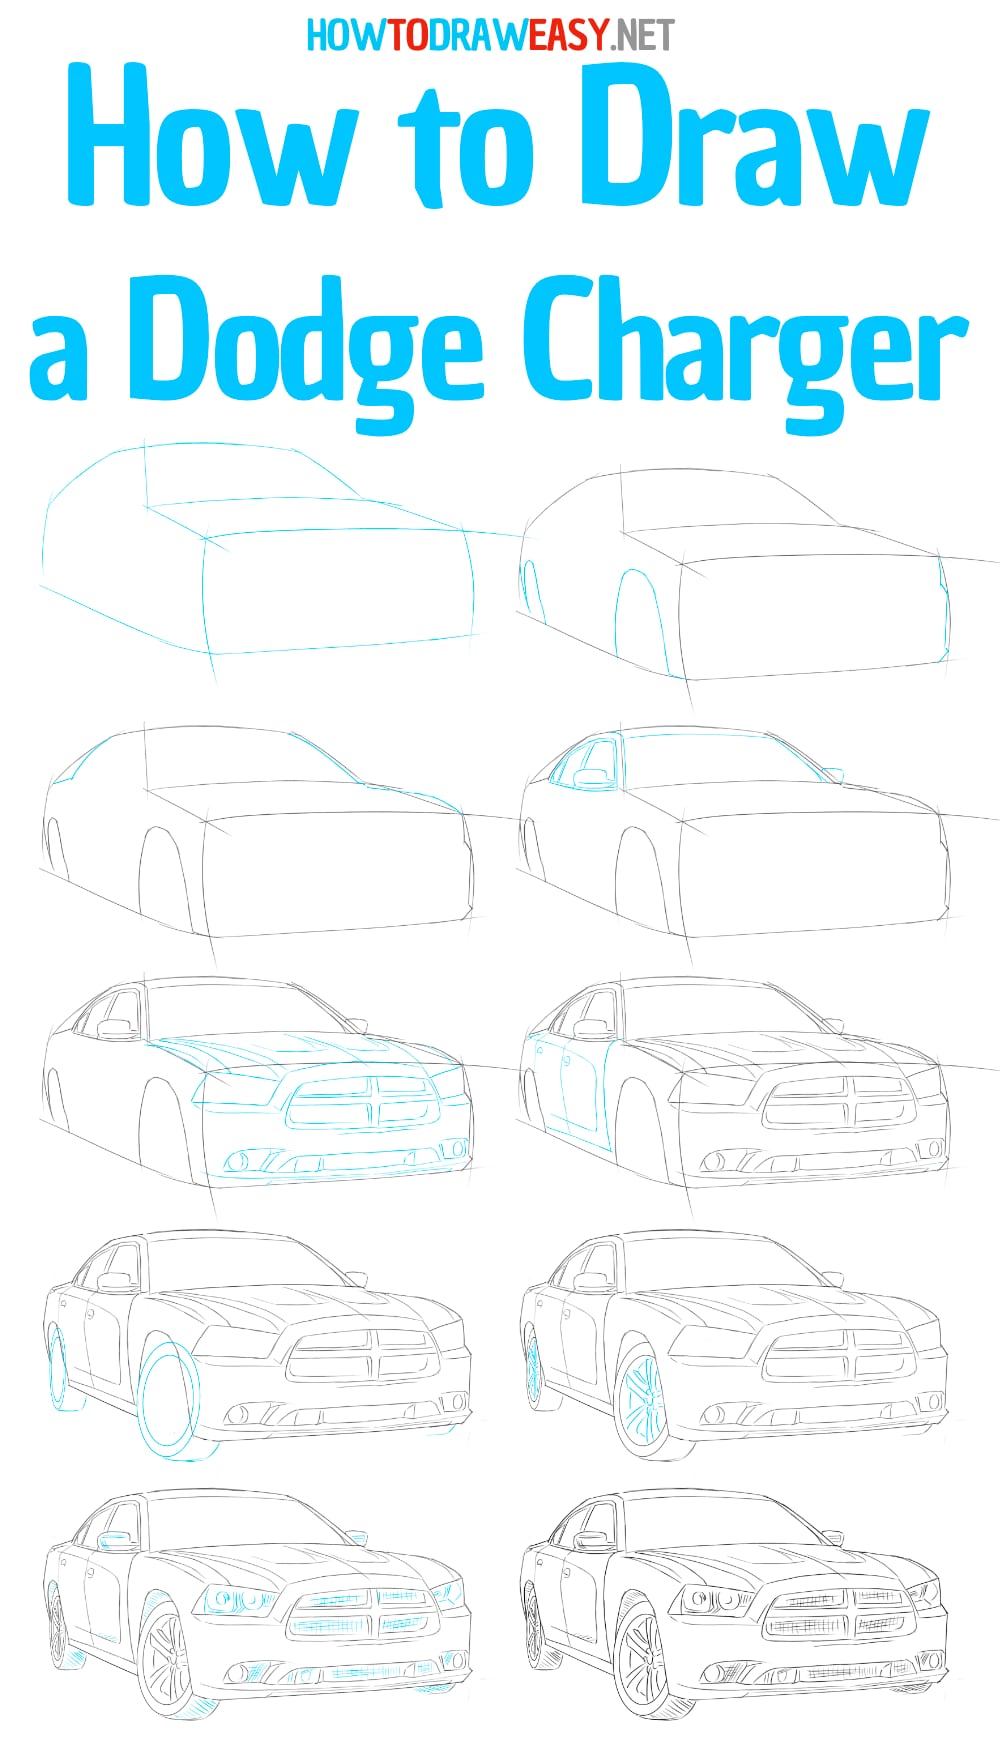 how to draw a dodge charger step by step